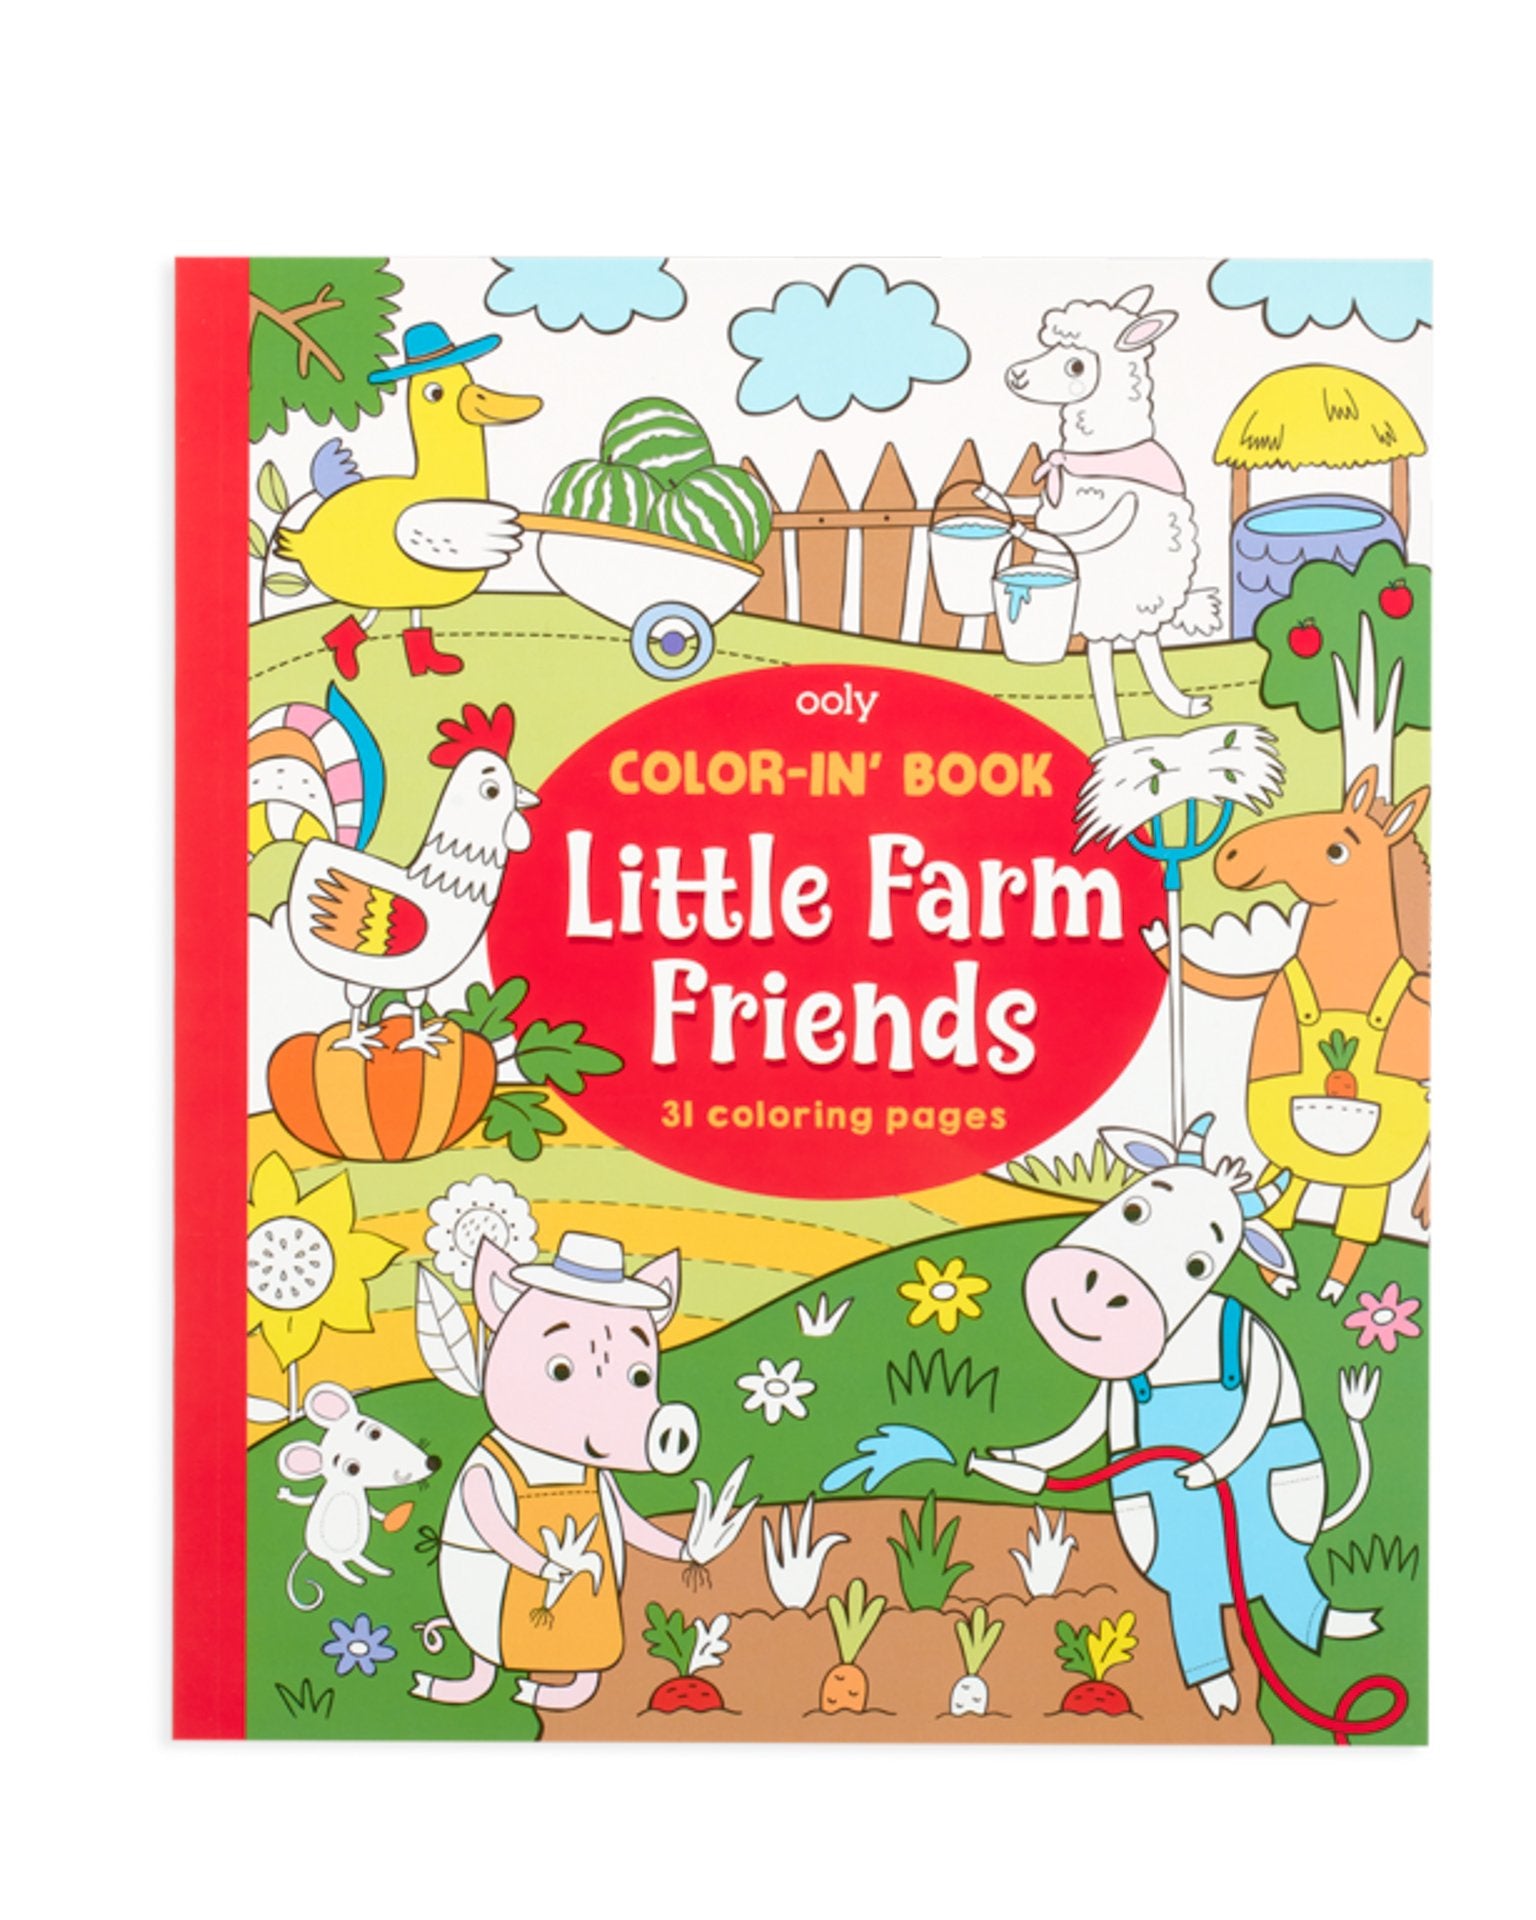 Little ooly play color-in' book: little farm animals